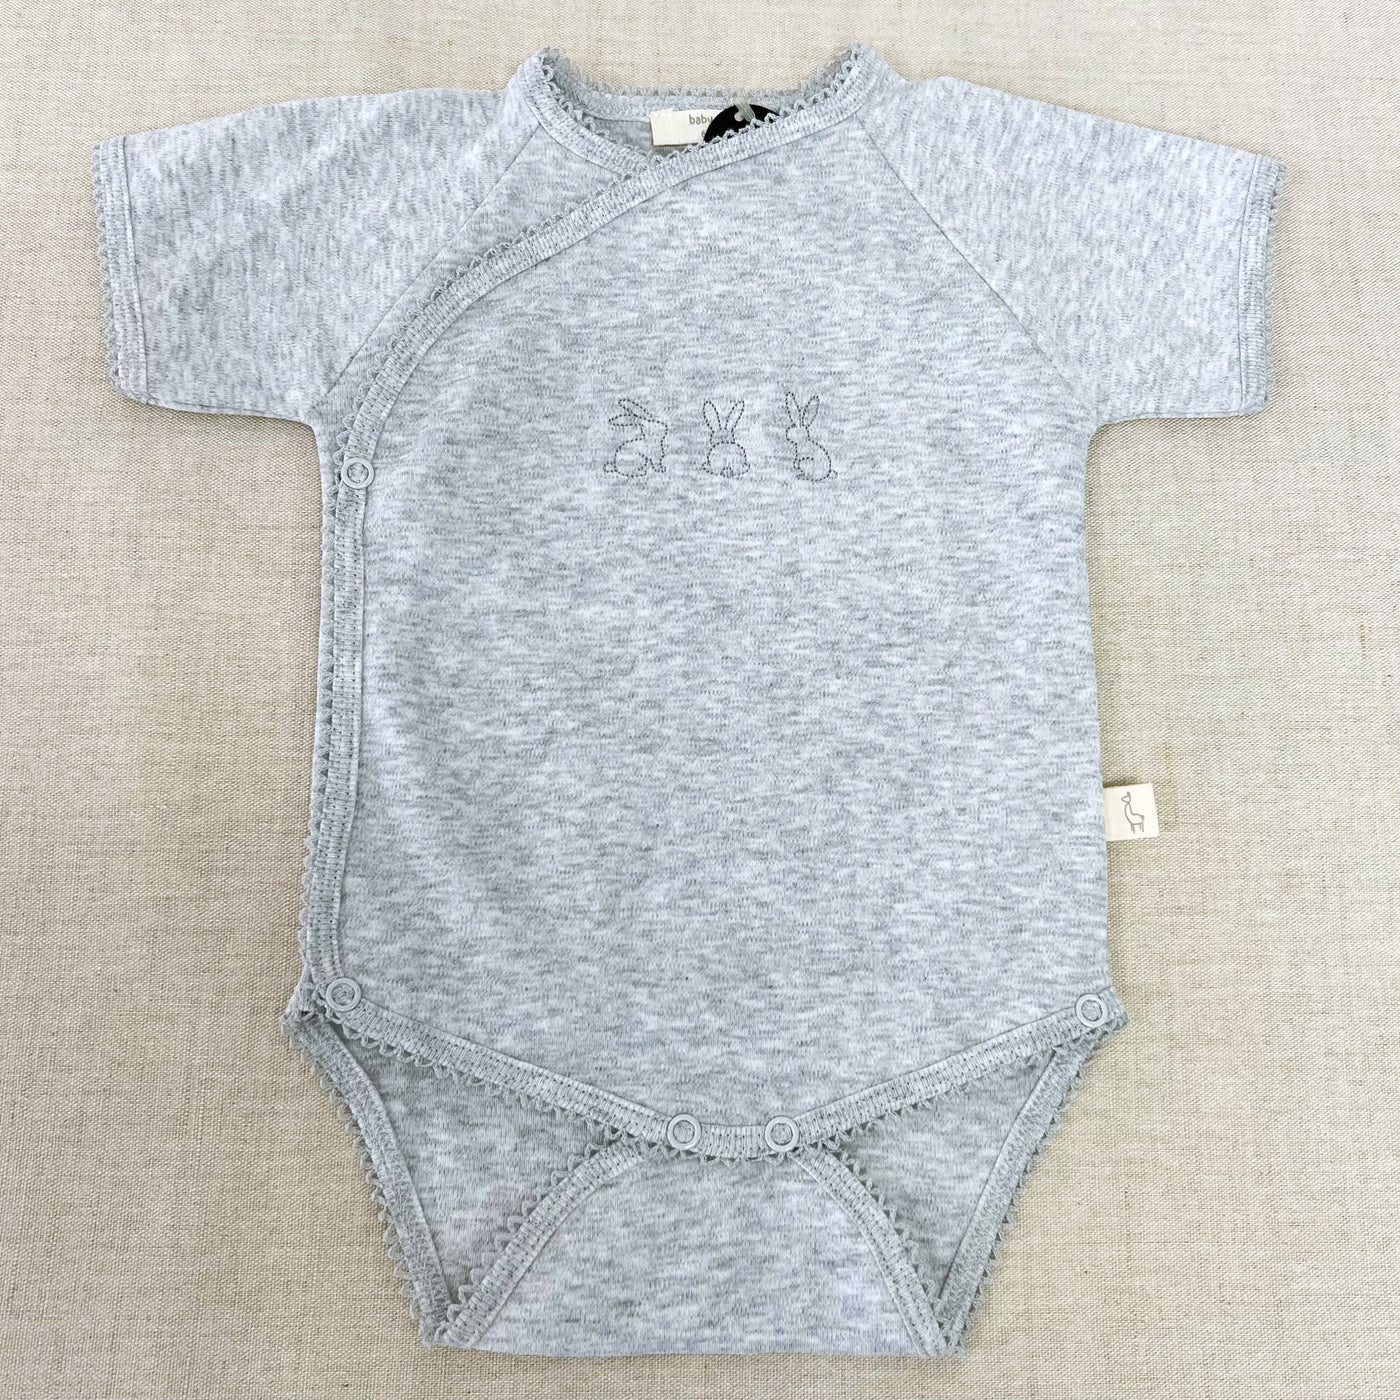 Baby Suit Short Grey With Grey Embroidery 0-3 months